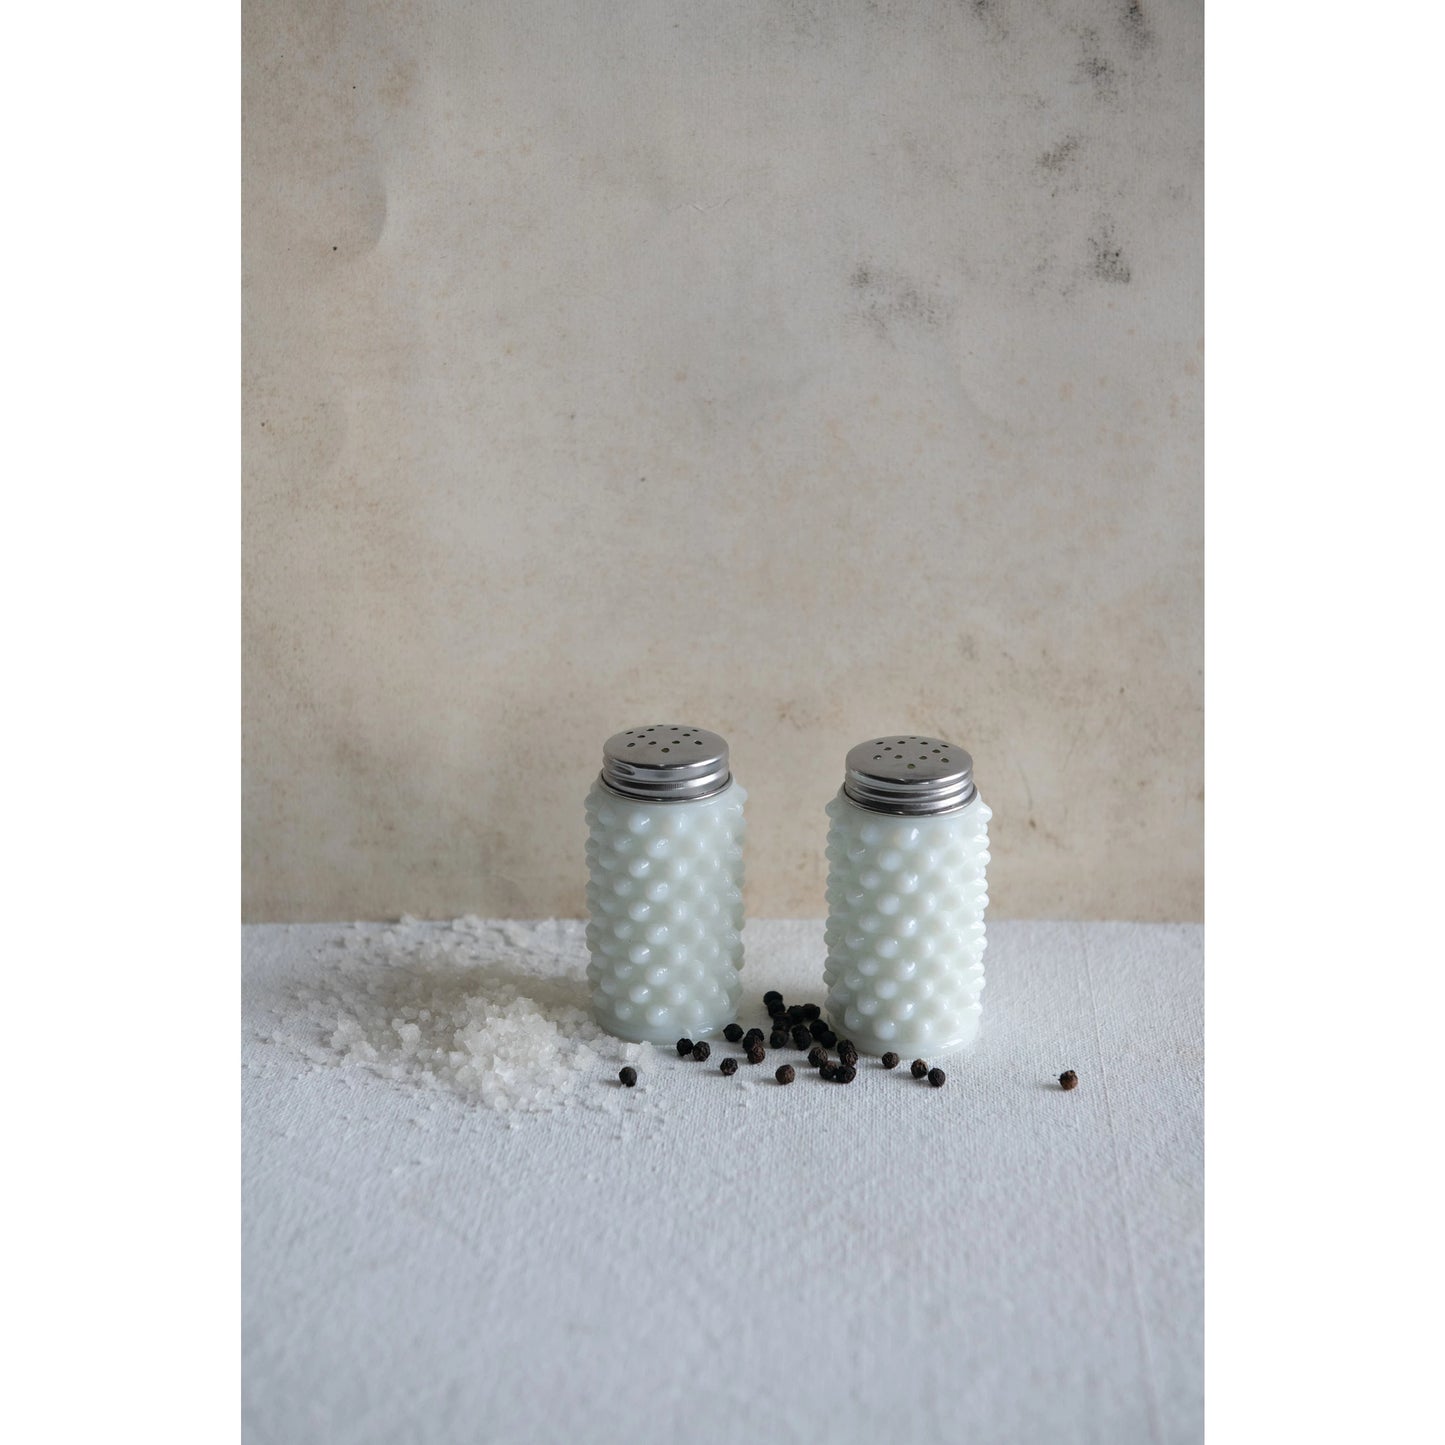 Milk Glass Salt and Pepper Shakers, Set of 2